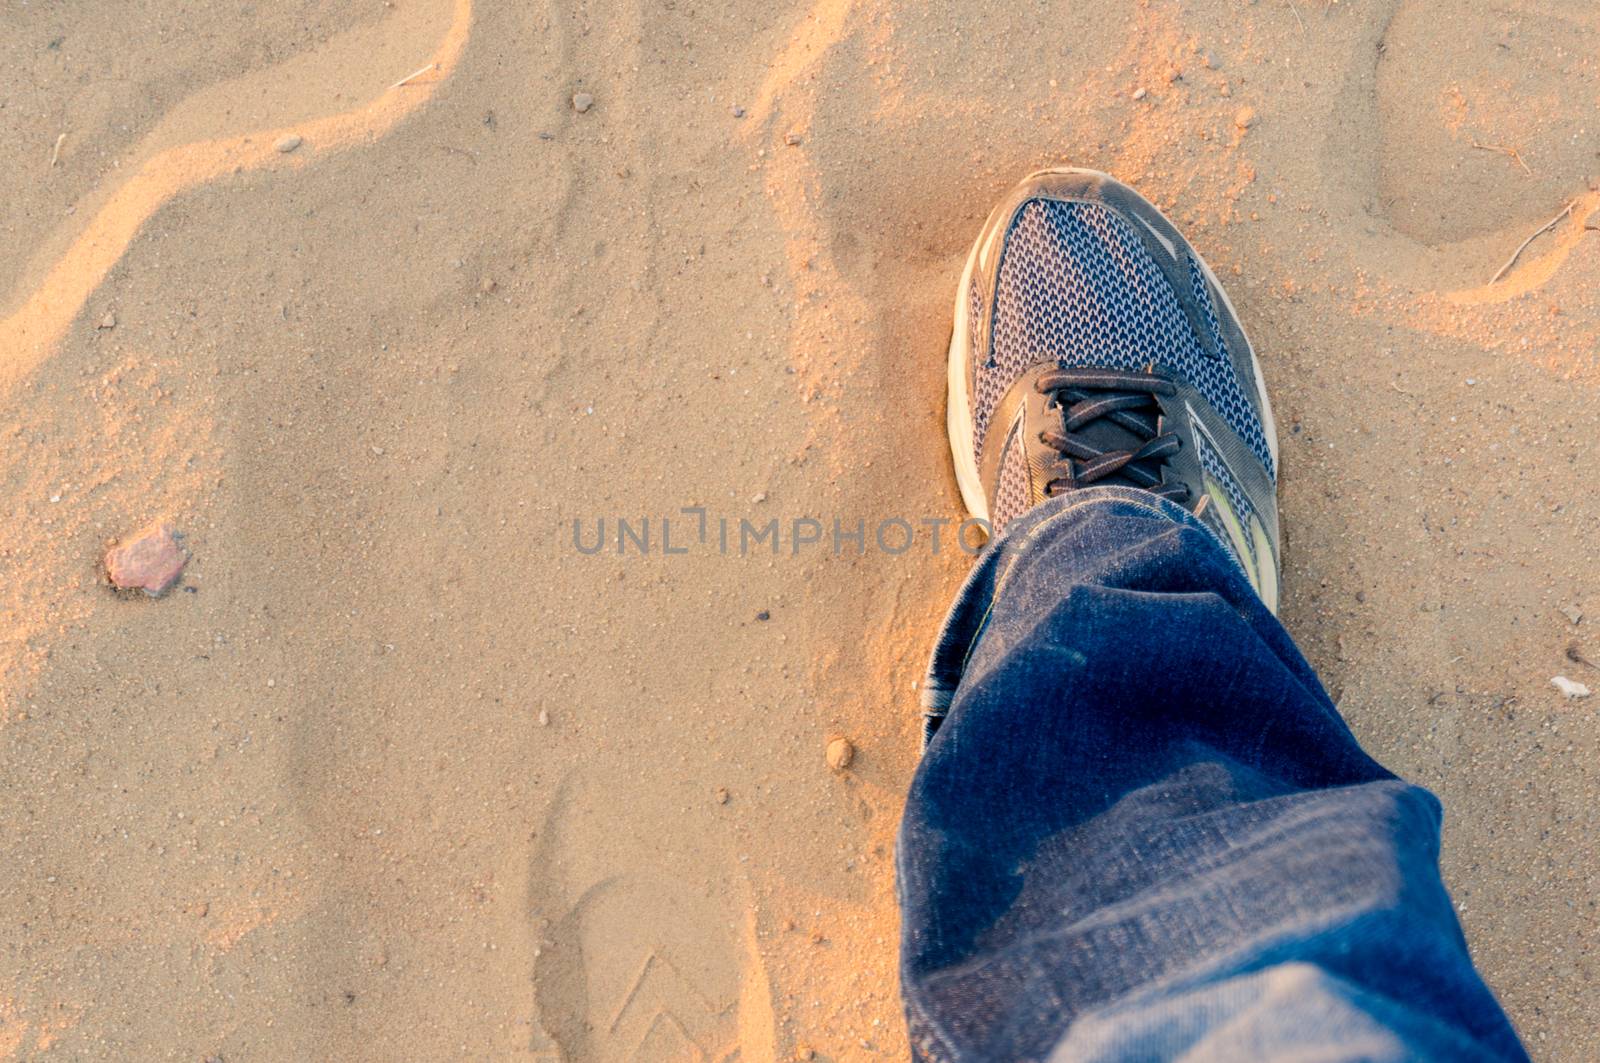 Top down view of man extending a foot with a worn sneaker jeans on dusty sand showing travel and trekking during evening as sunlight bounces off it by Shalinimathur